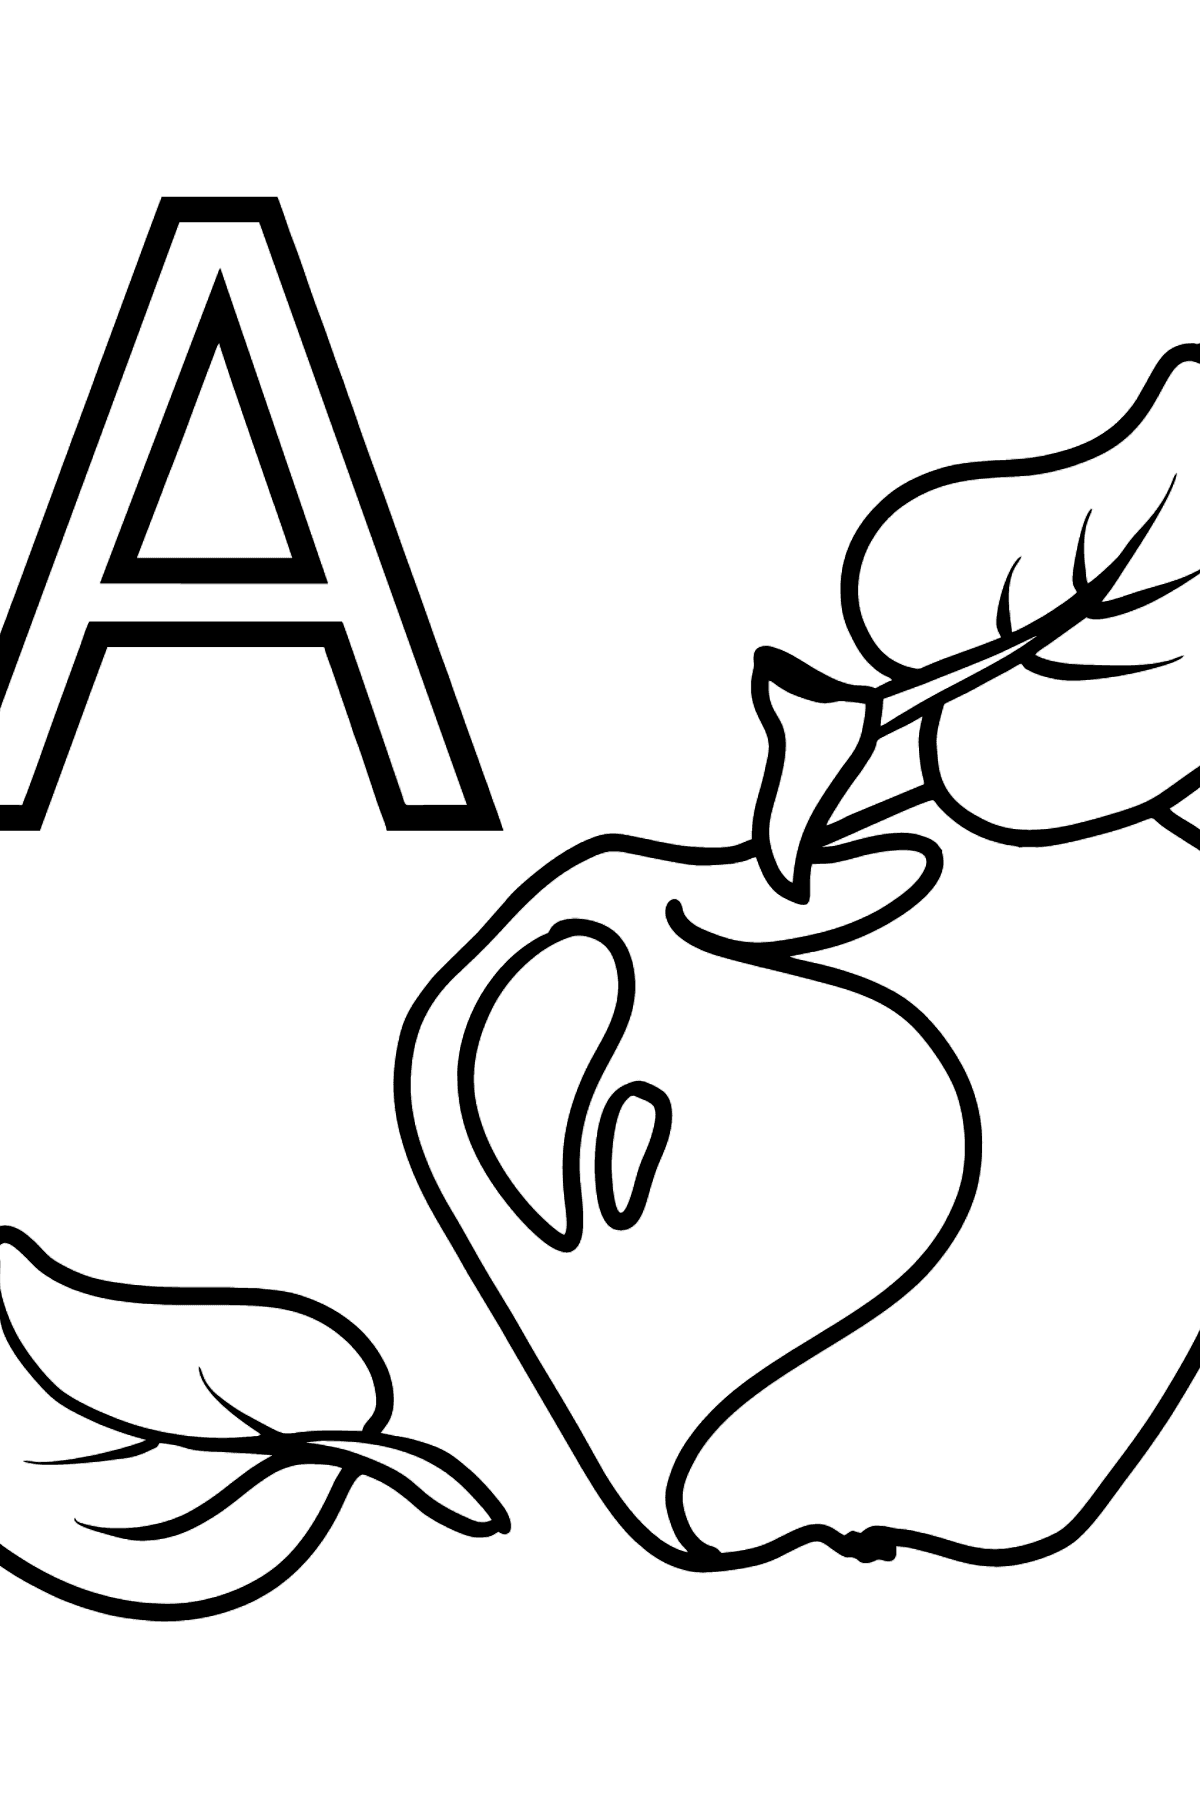 German Letter A coloring pages - APFEL - Coloring Pages for Kids